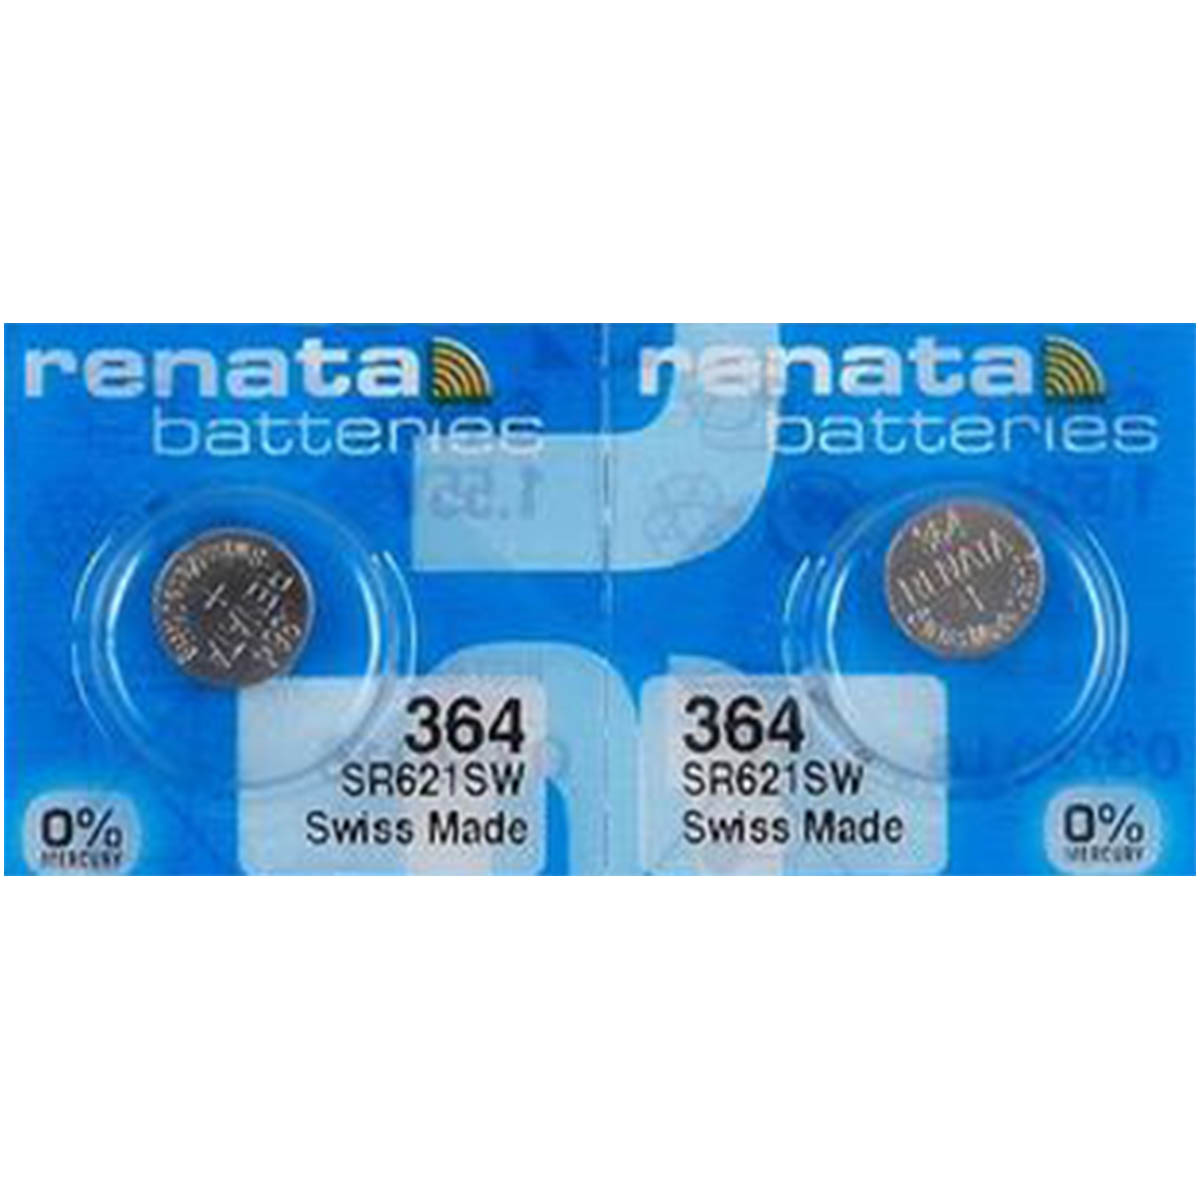 Murata 364 SR621SW Battery 1.55V Silver Oxide Watch Button Cell - Replaces  Sony 364 (2 Batteries)